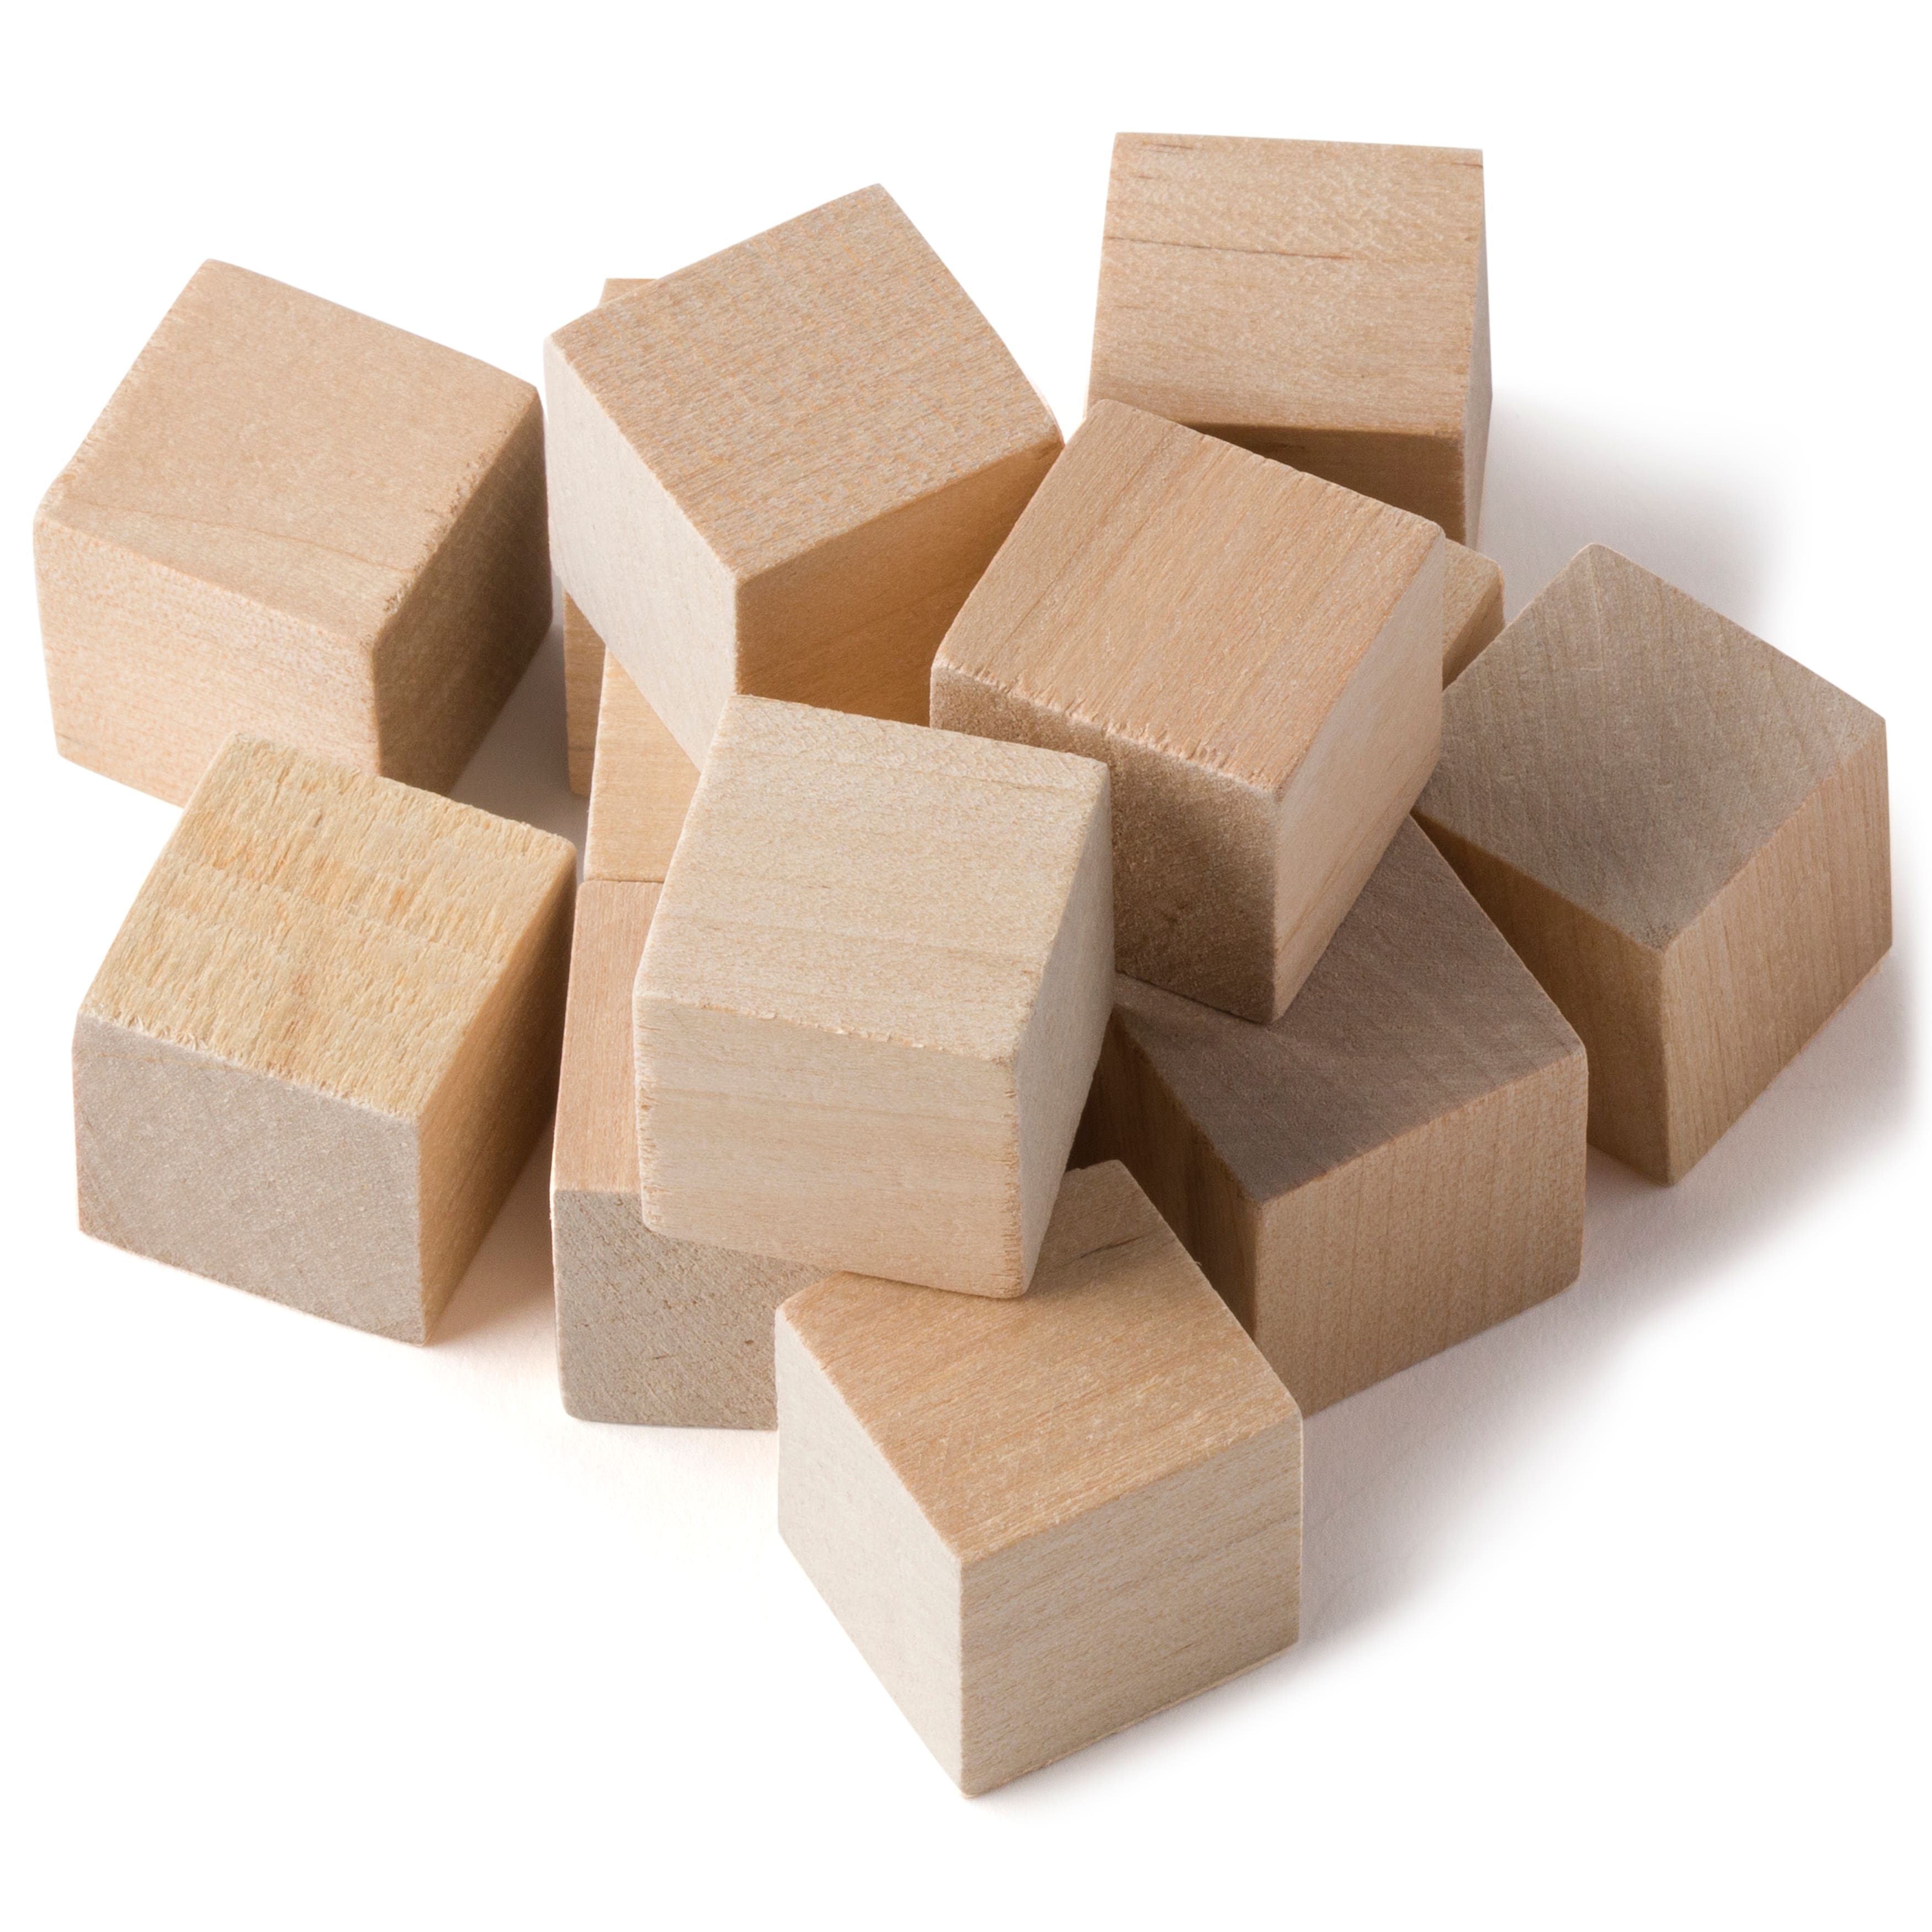 ArtMinds 1 Square Wood Blocks - 1 in